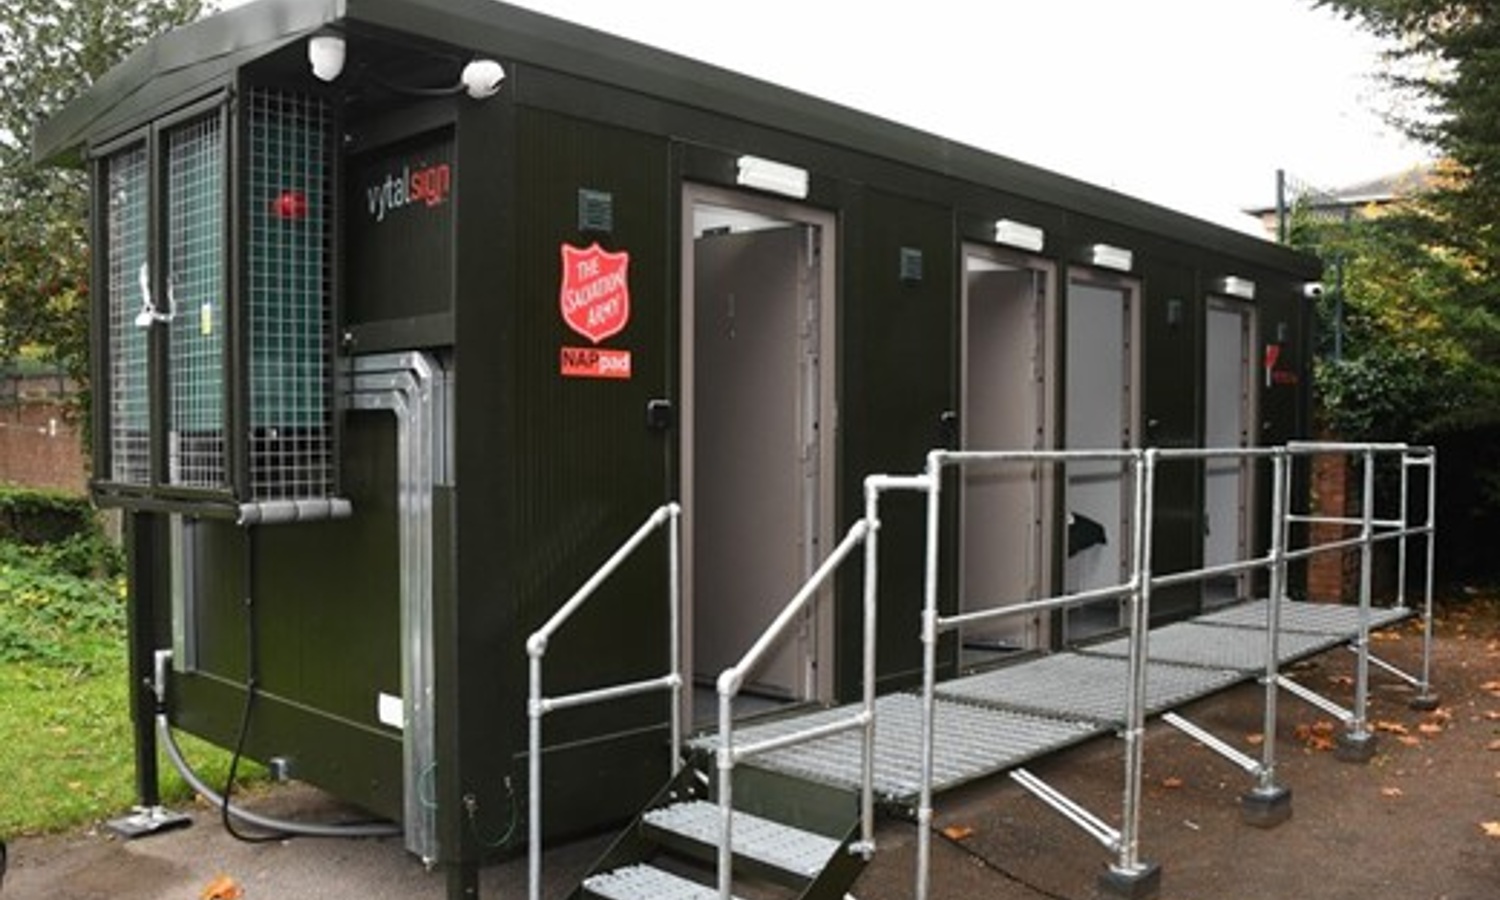 New pop up accommodation for rough sleepers secured with SALTO